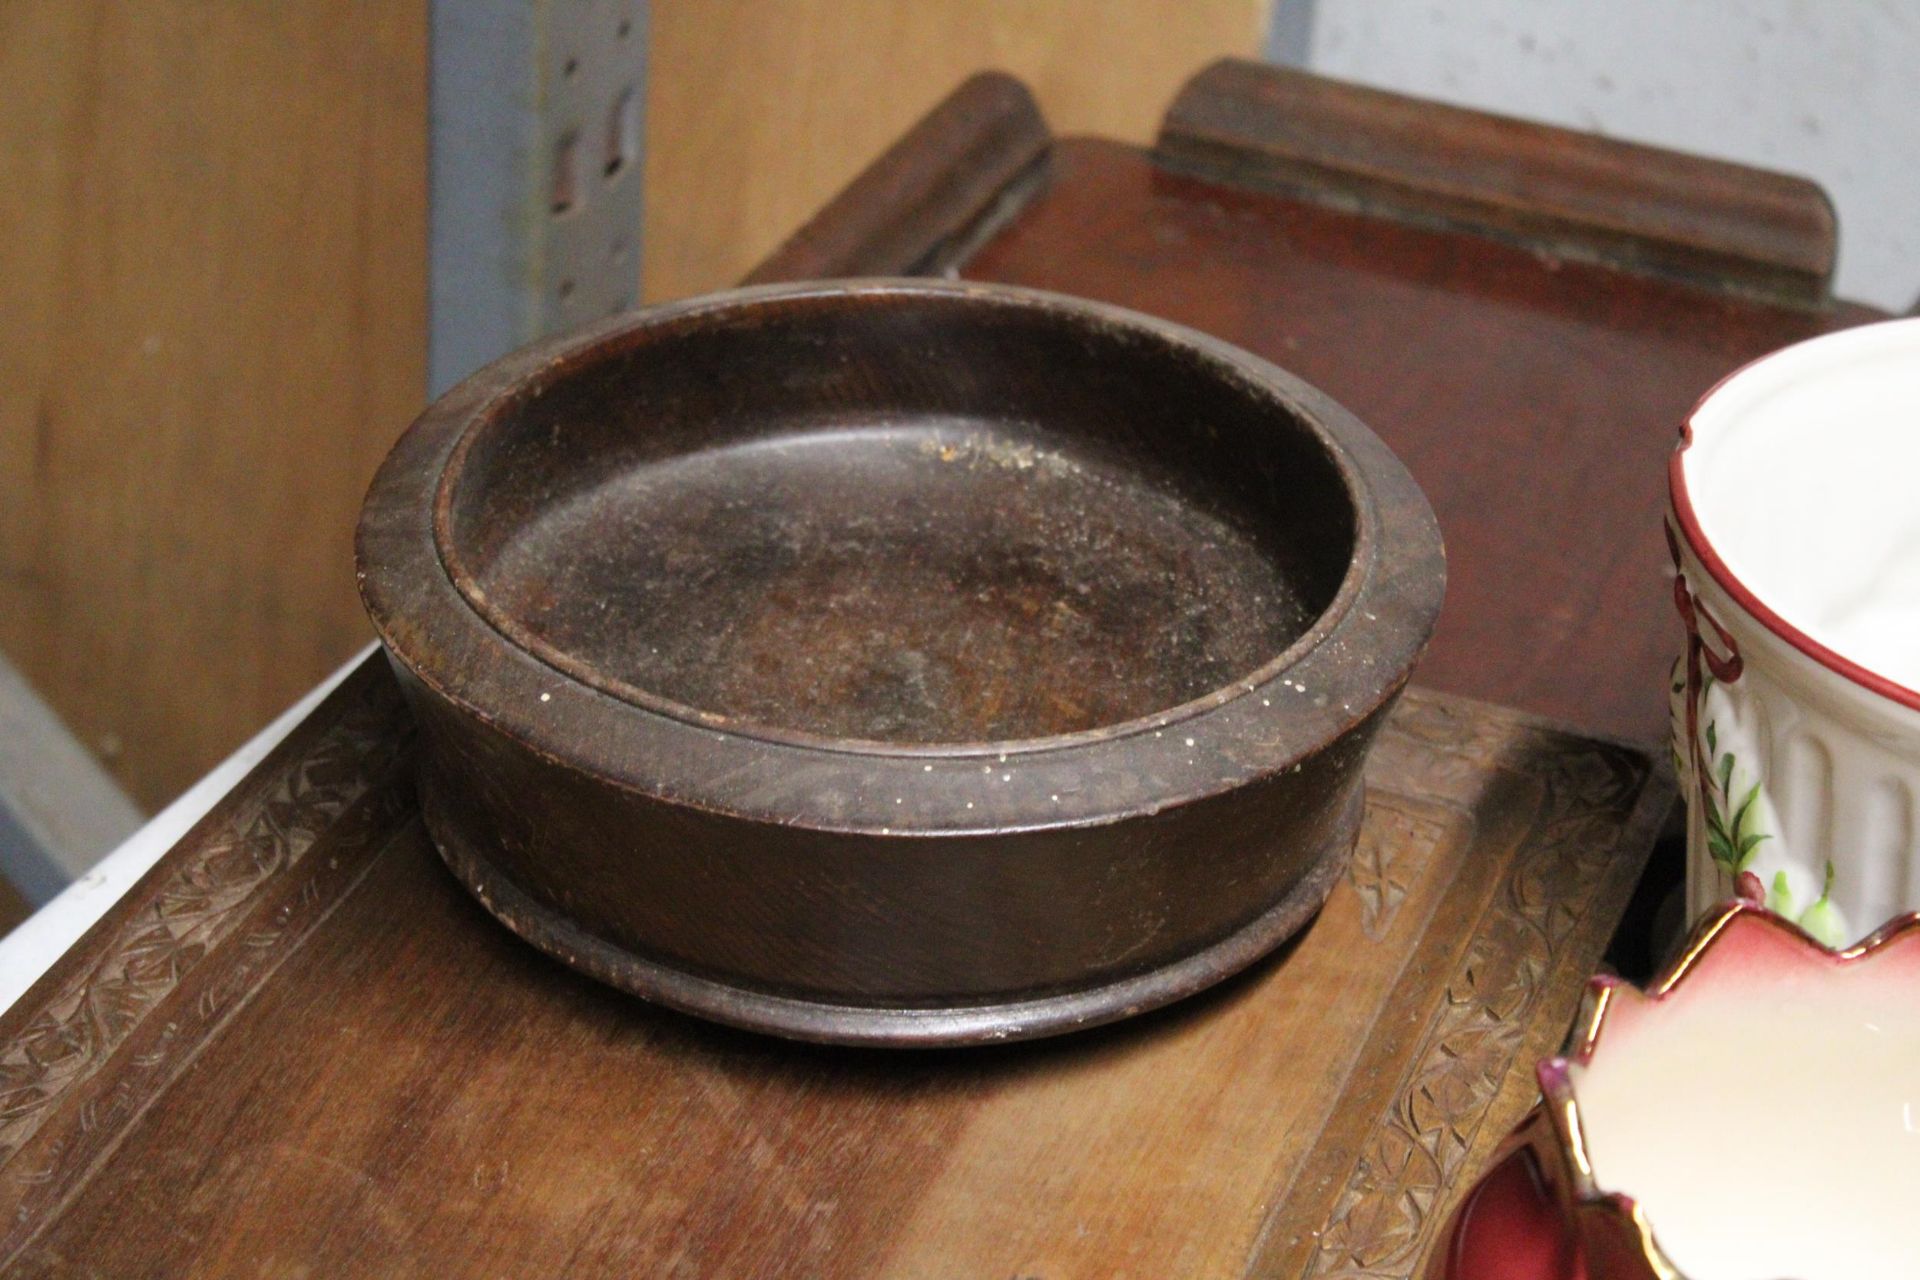 TWO VINTAGE WOODEN TRAYS, ONE WITH CARVED EDGES PLUS A MAHOGANY BOWL ON BUN FEET - Image 2 of 4